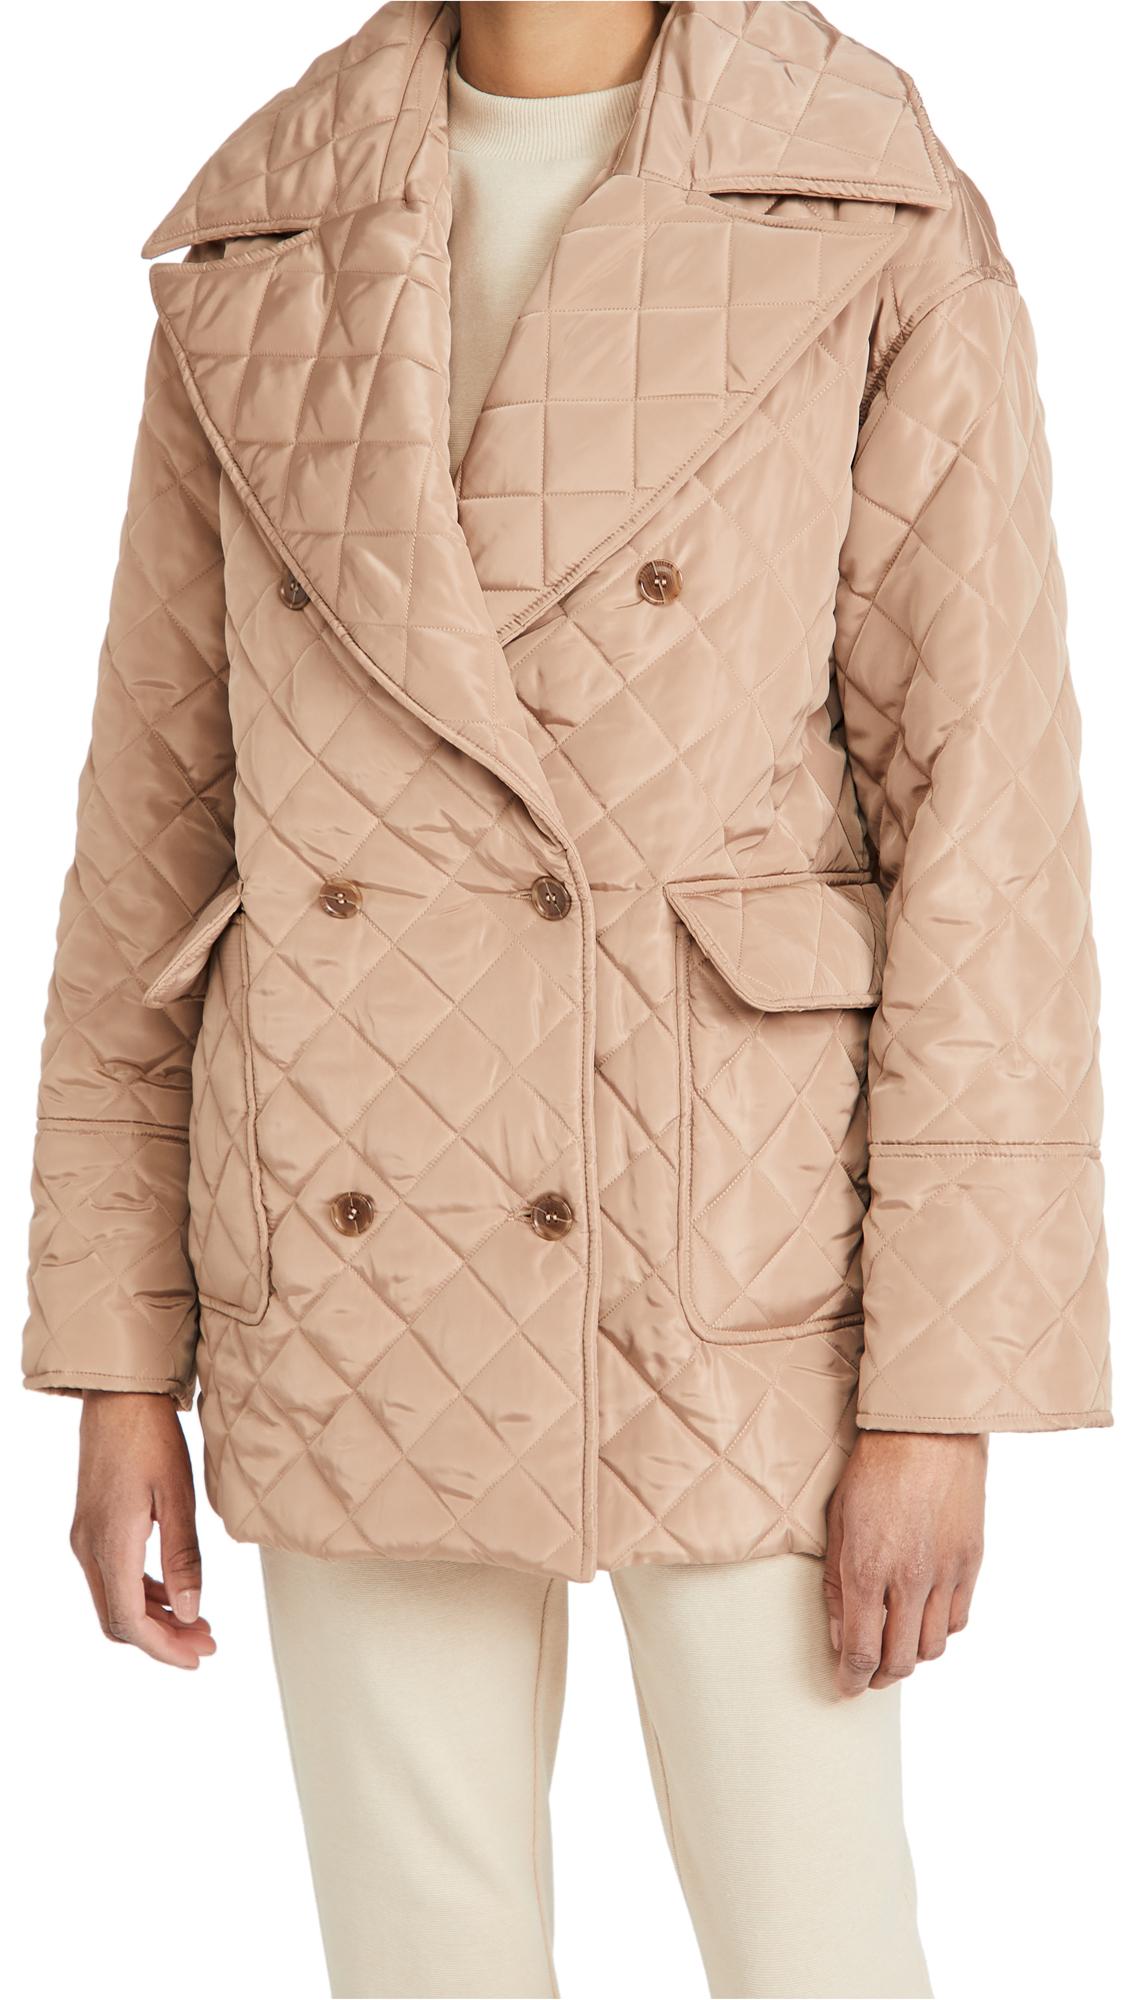 Munthe Synthetic Torena Jacket in Camel (Natural) - Lyst